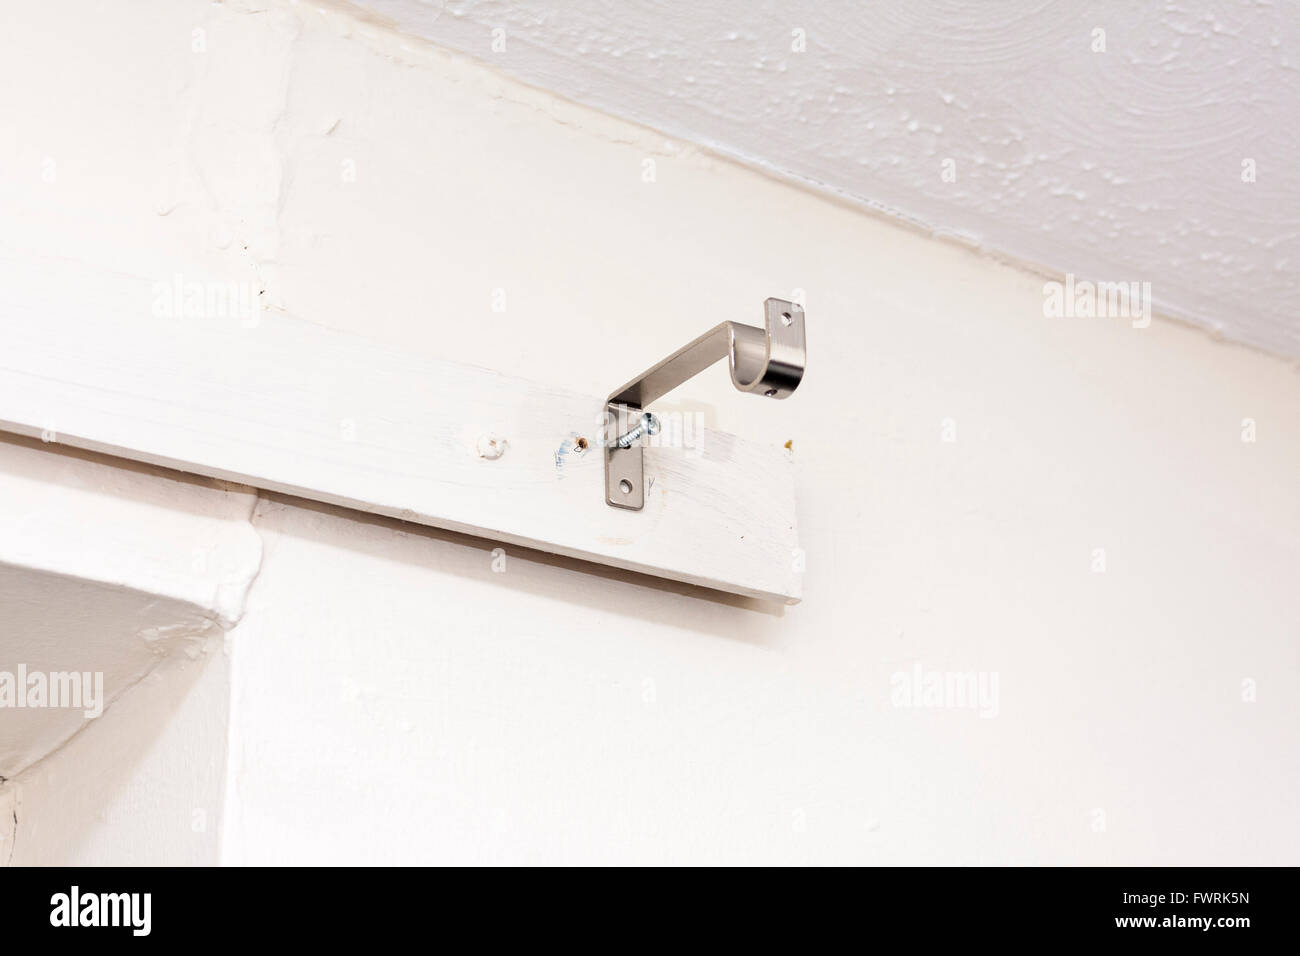 A metal curtain rail bracket put up on a wall with a screw Stock Photo